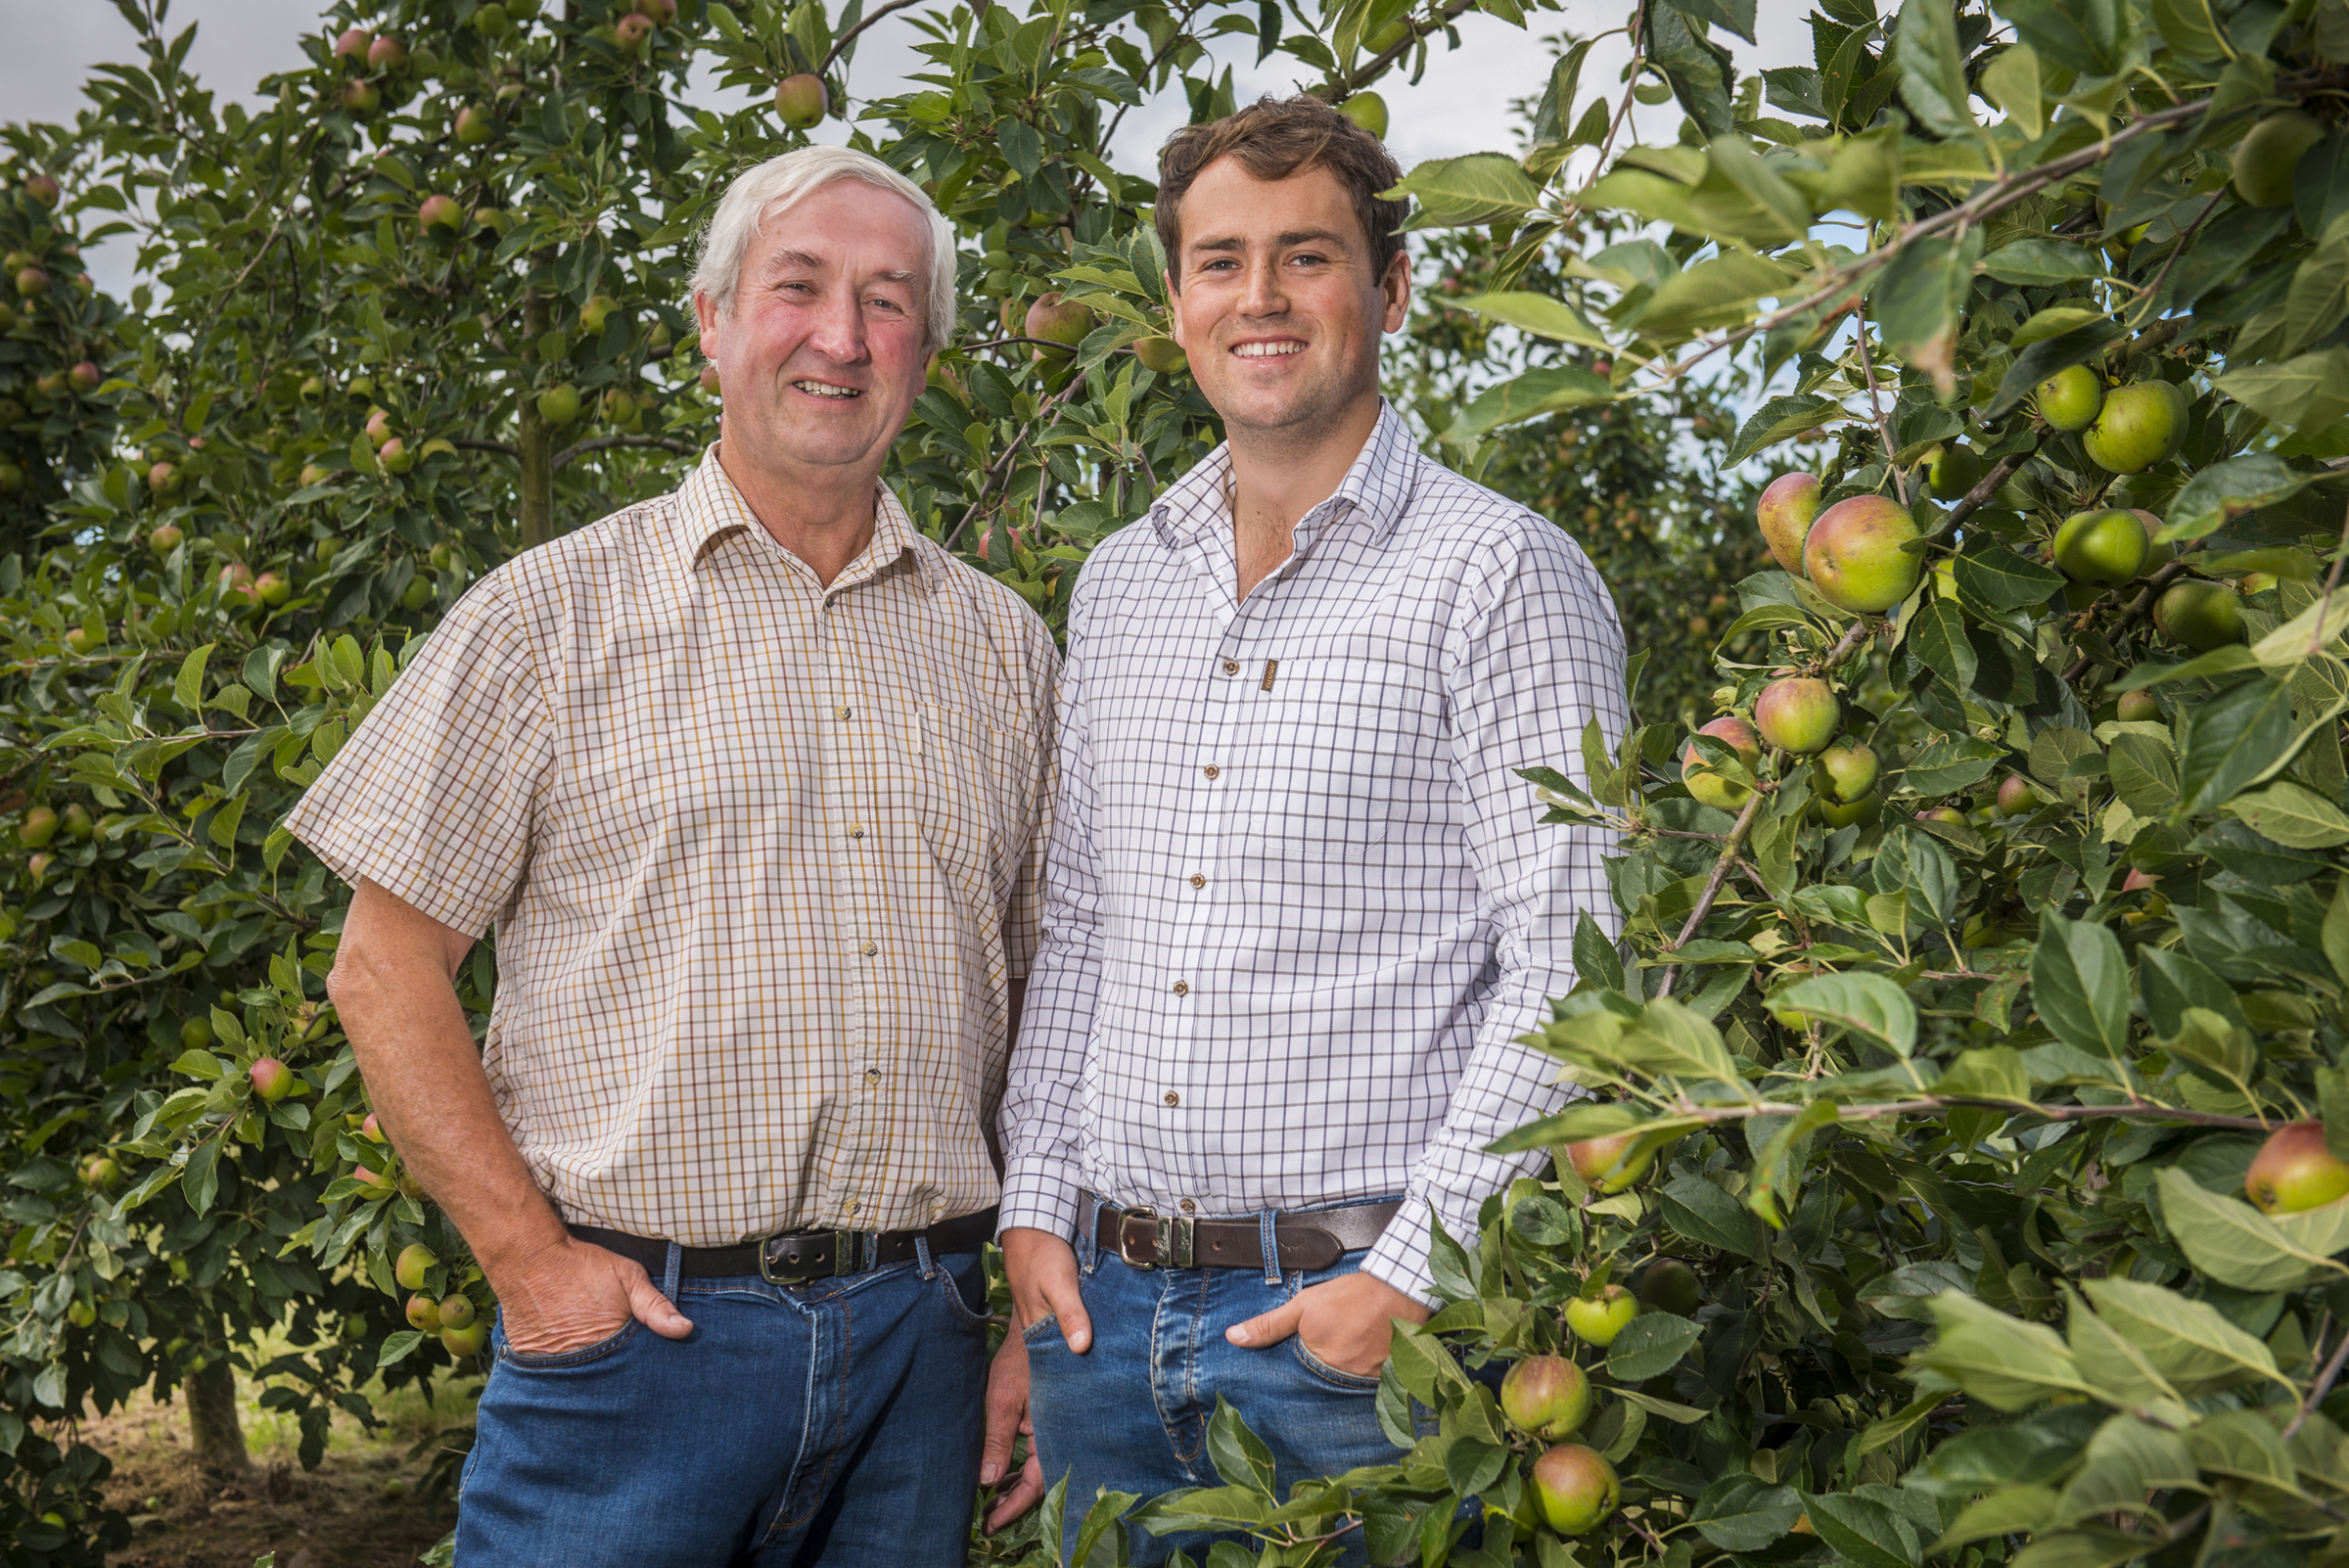 Our Apple Growers of the Year